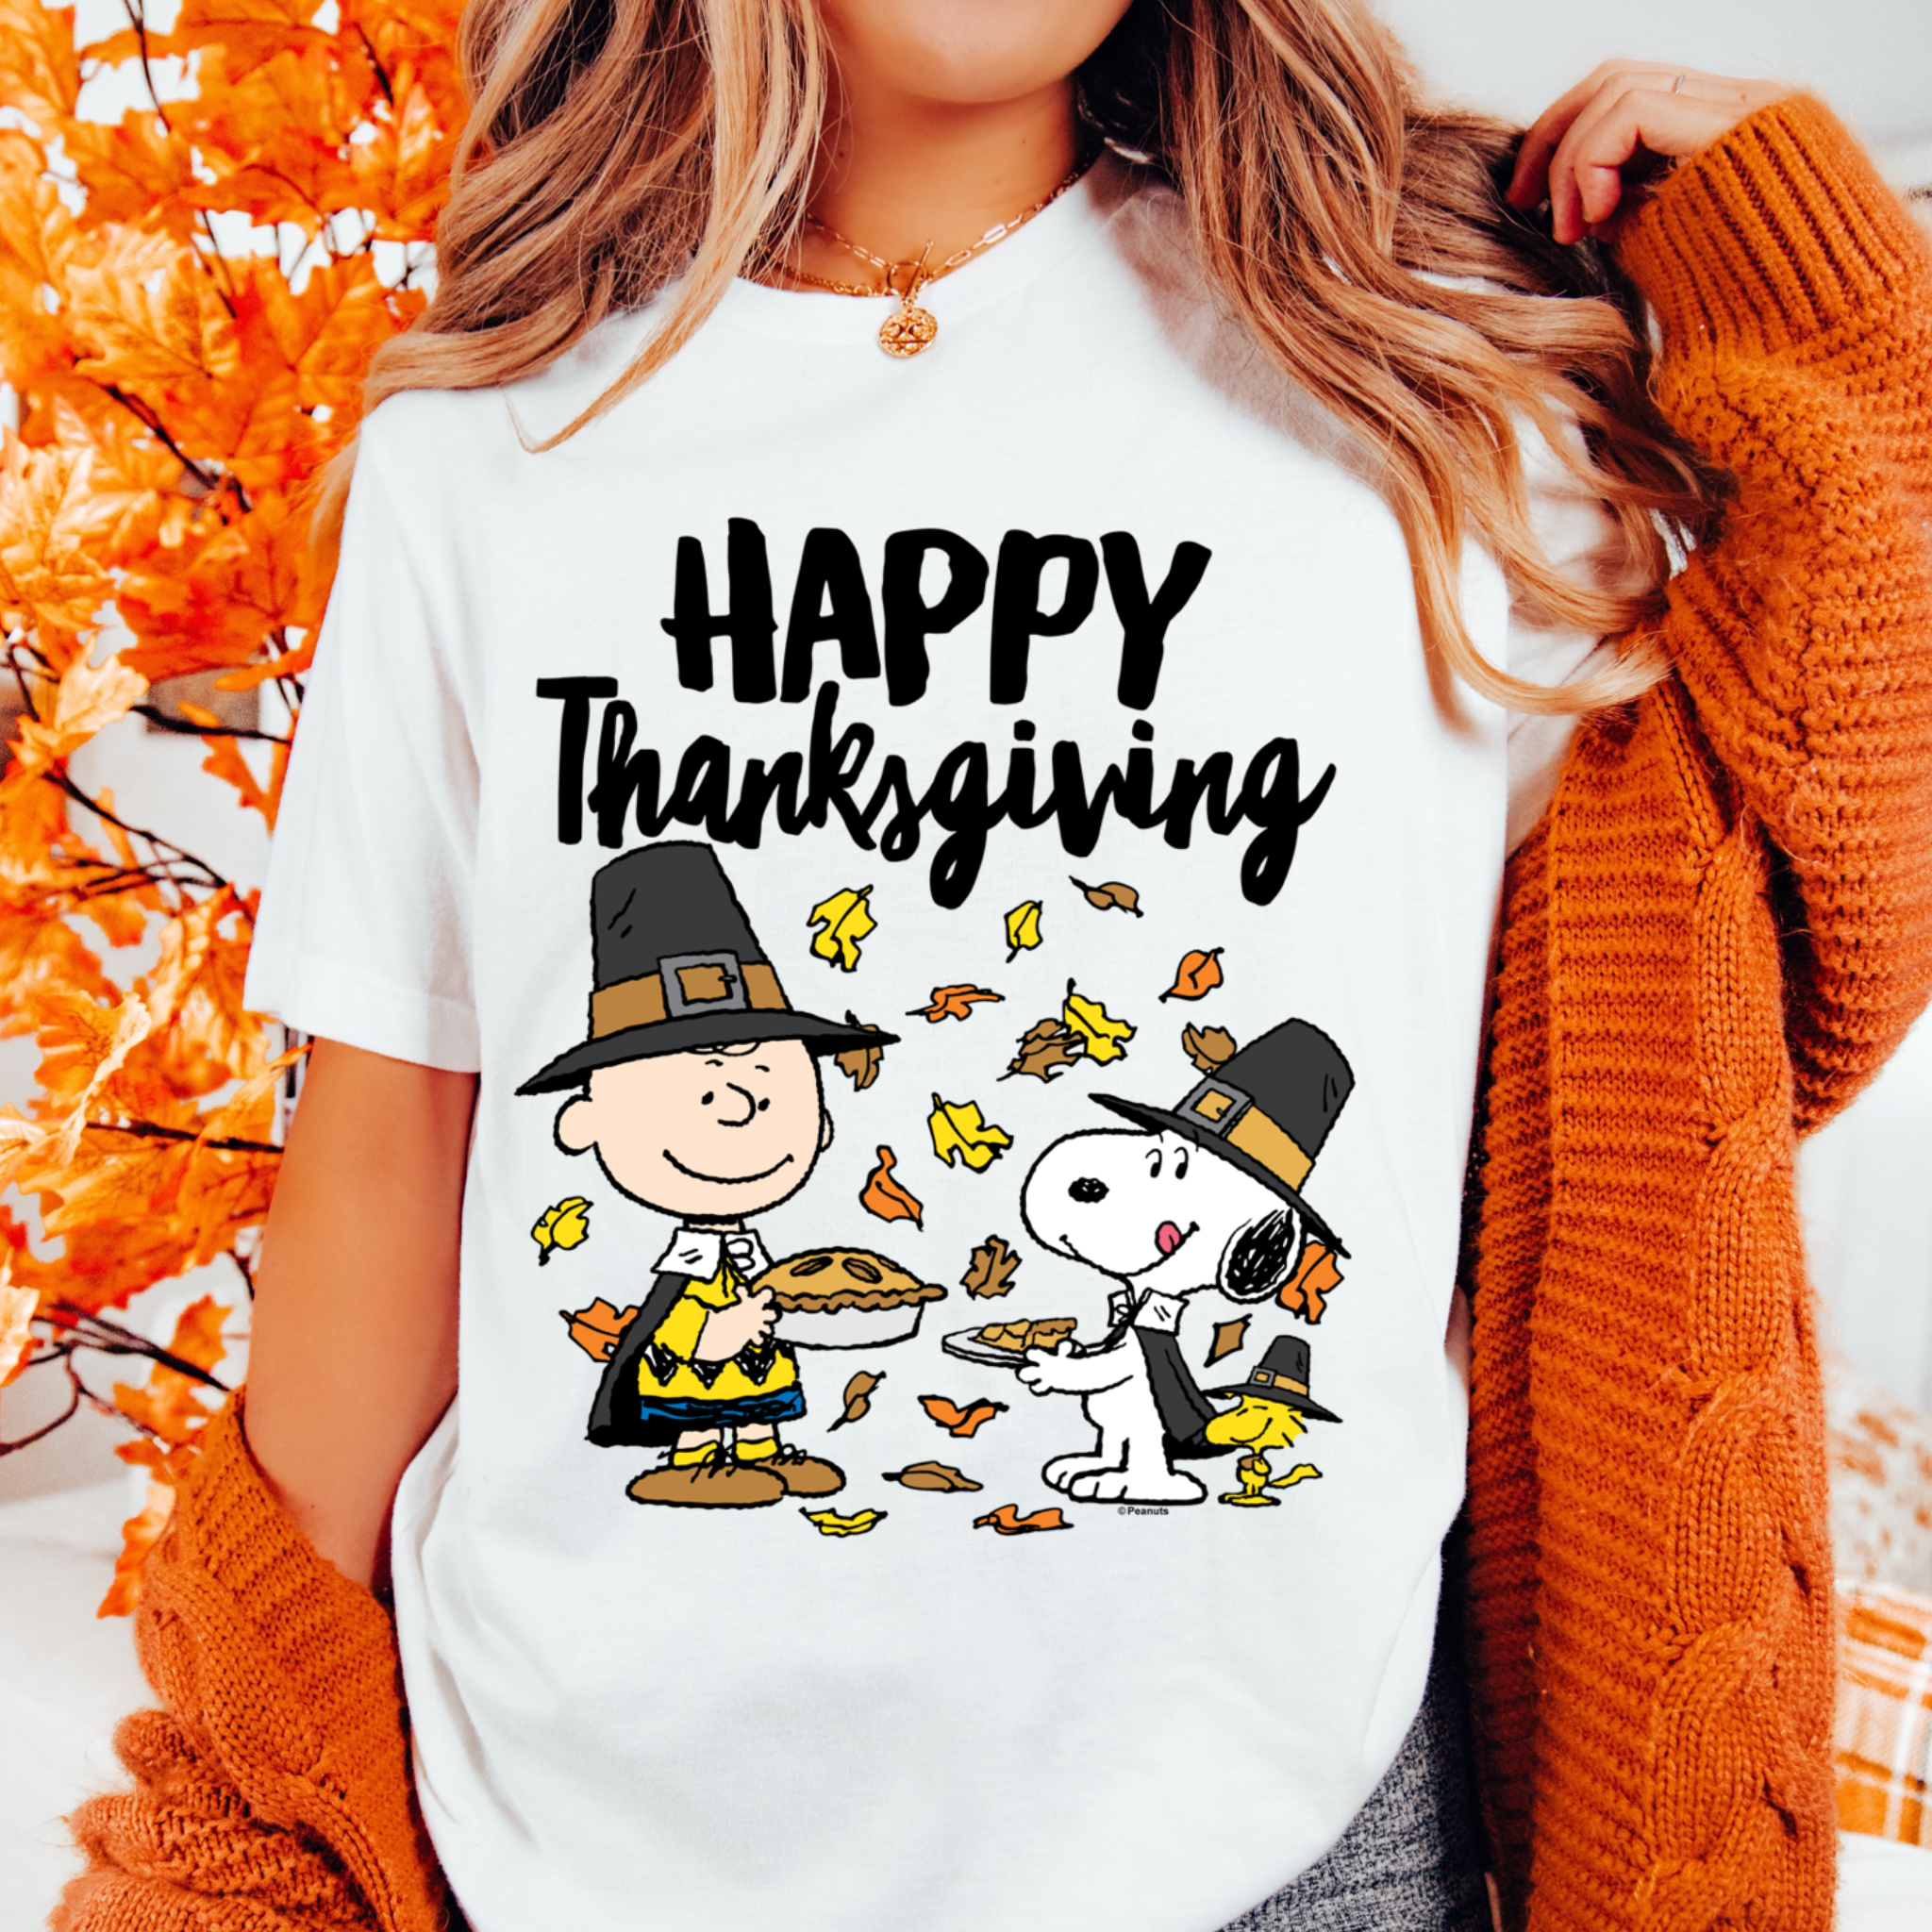 Happy Thanksgiving Sublimation Transfer